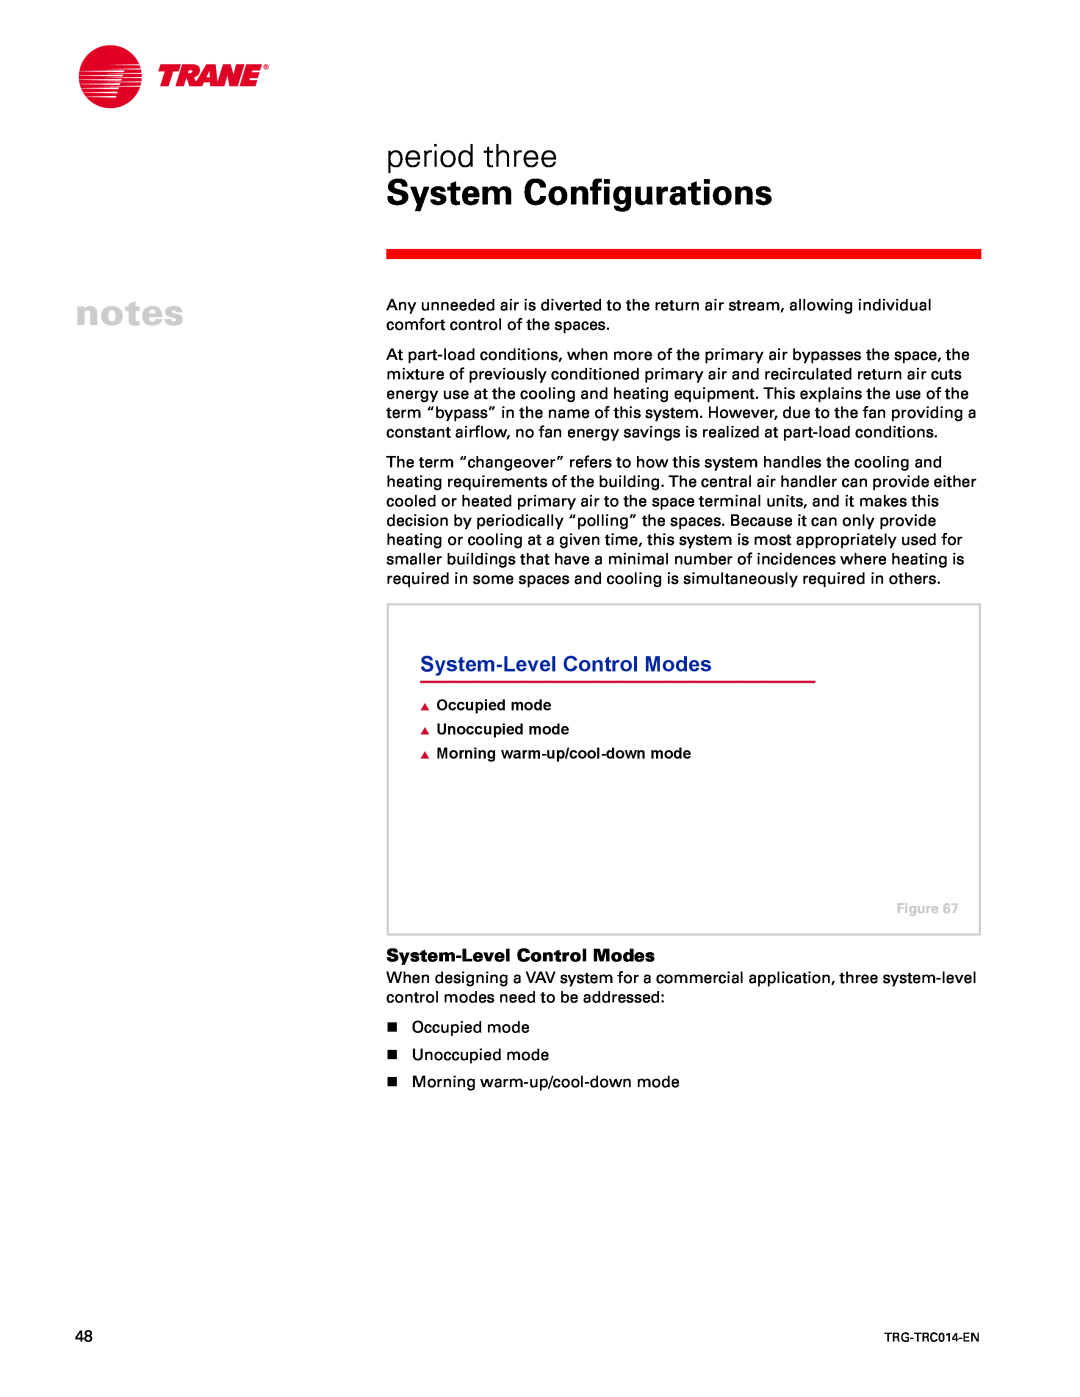 Trane TRG-TRC014-EN manual System-LevelControl Modes, System Configurations, period three 